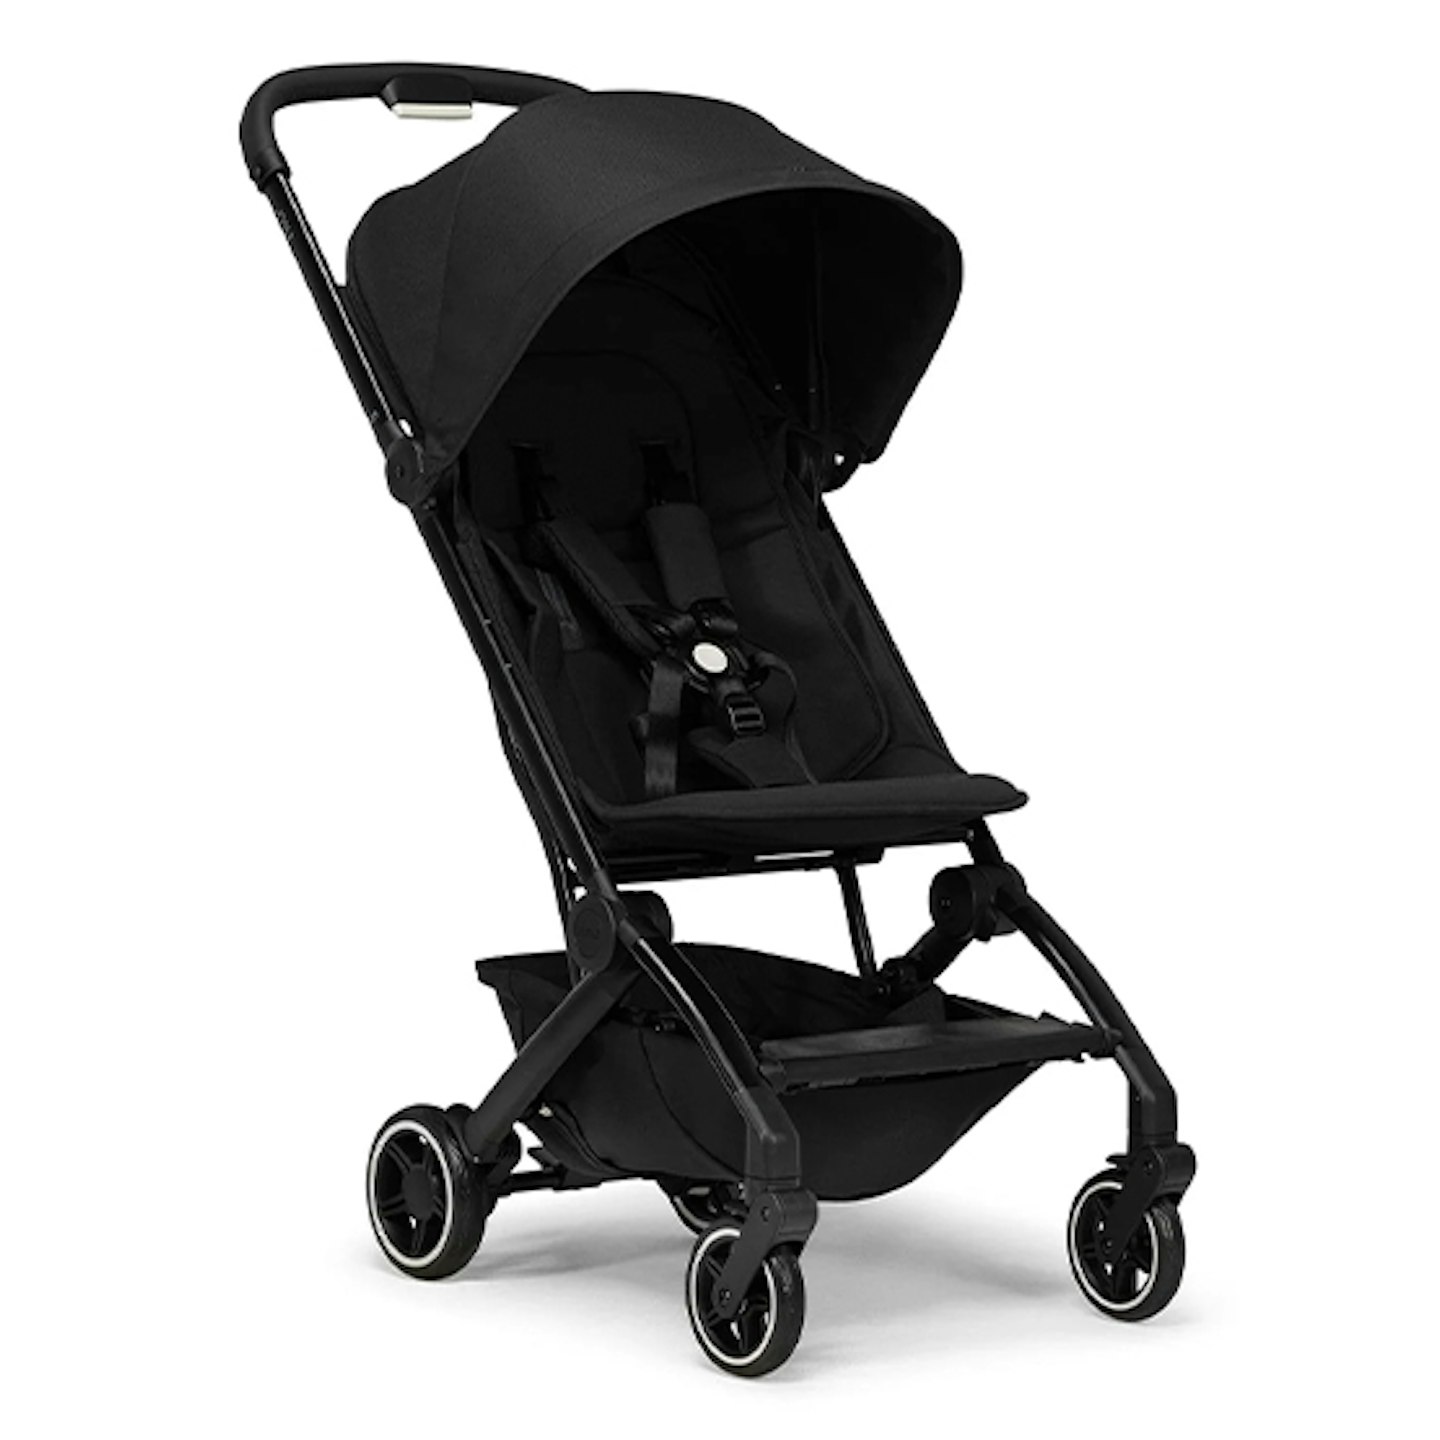 Joolz Aer+ Pushchair in Refined Black